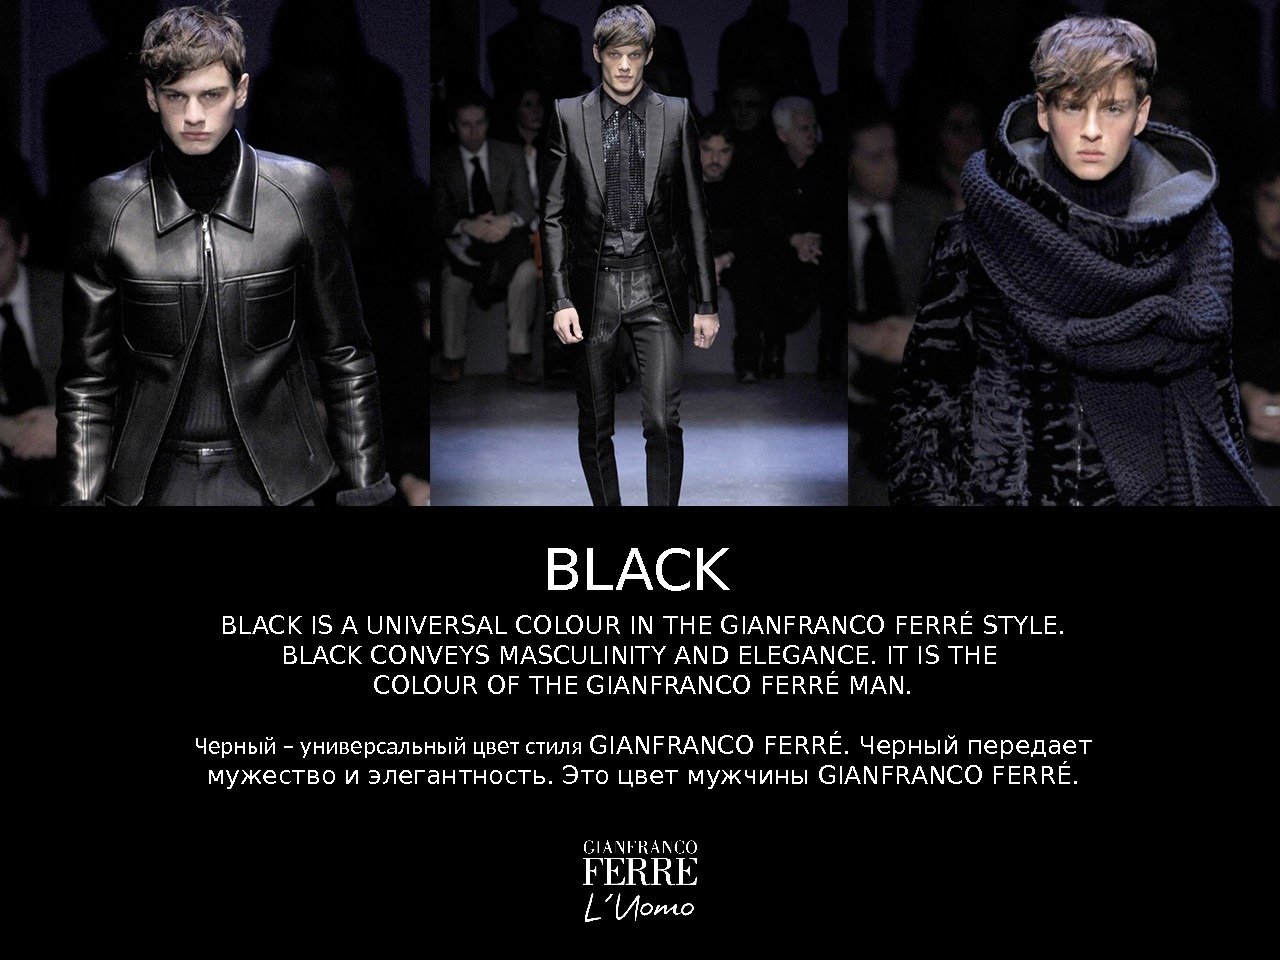 BLACK IS A UNIVERSAL COLOUR IN THE GIANFRANCO FERRÉ STYLE. BLACK CONVEYS MASCULINITY AND